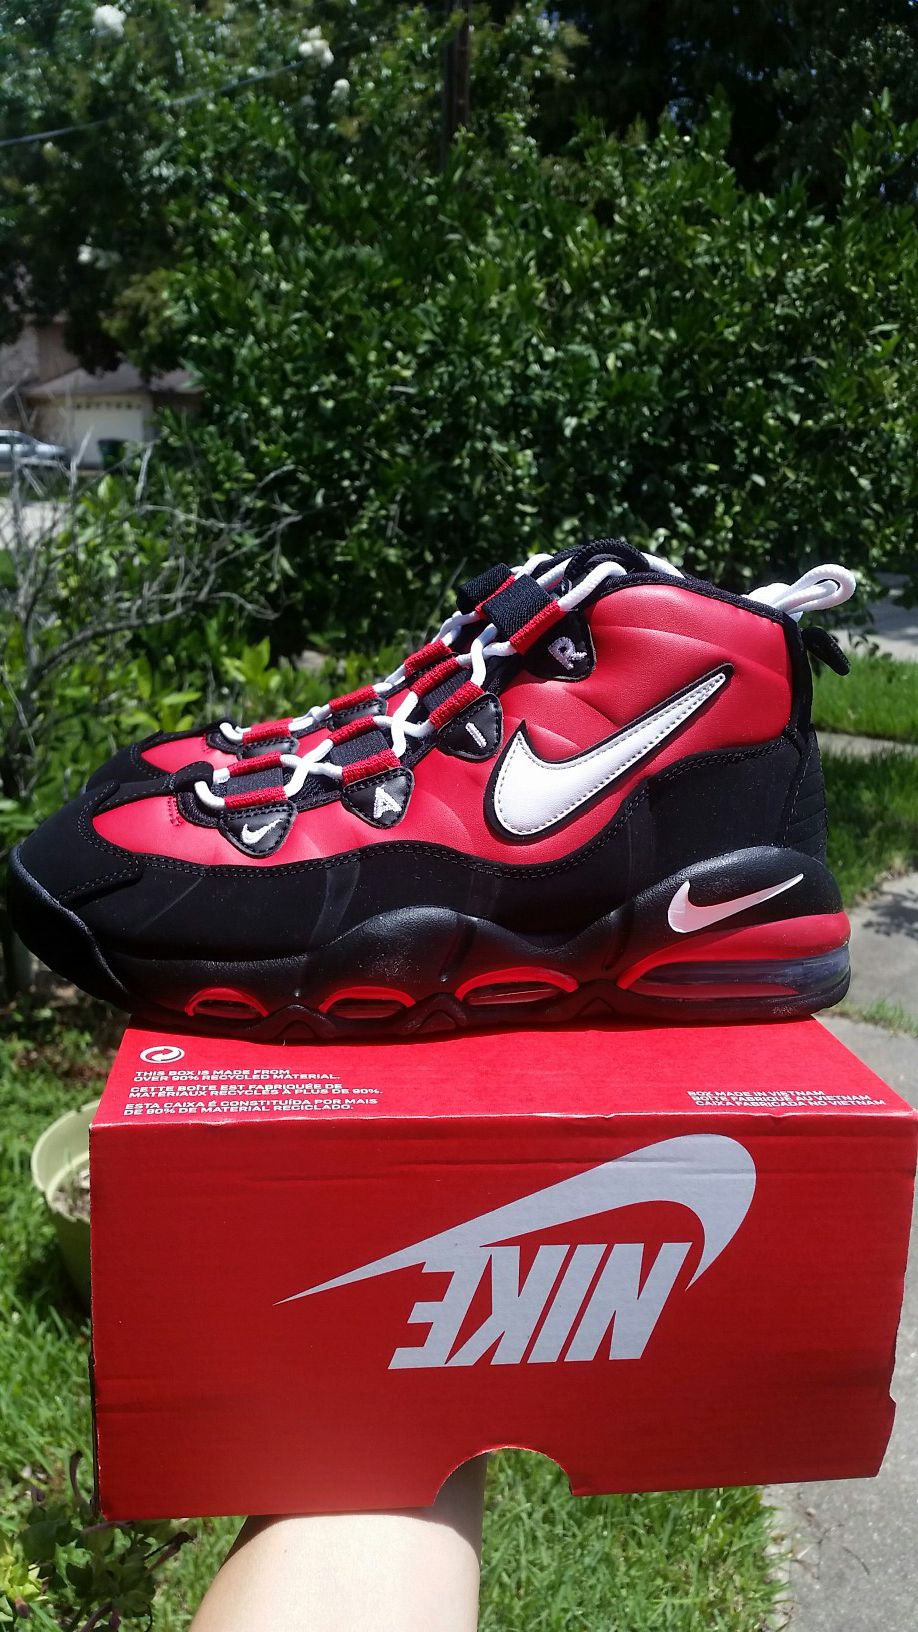 New Air Max Uptempo 95 men size 9.5 red Black